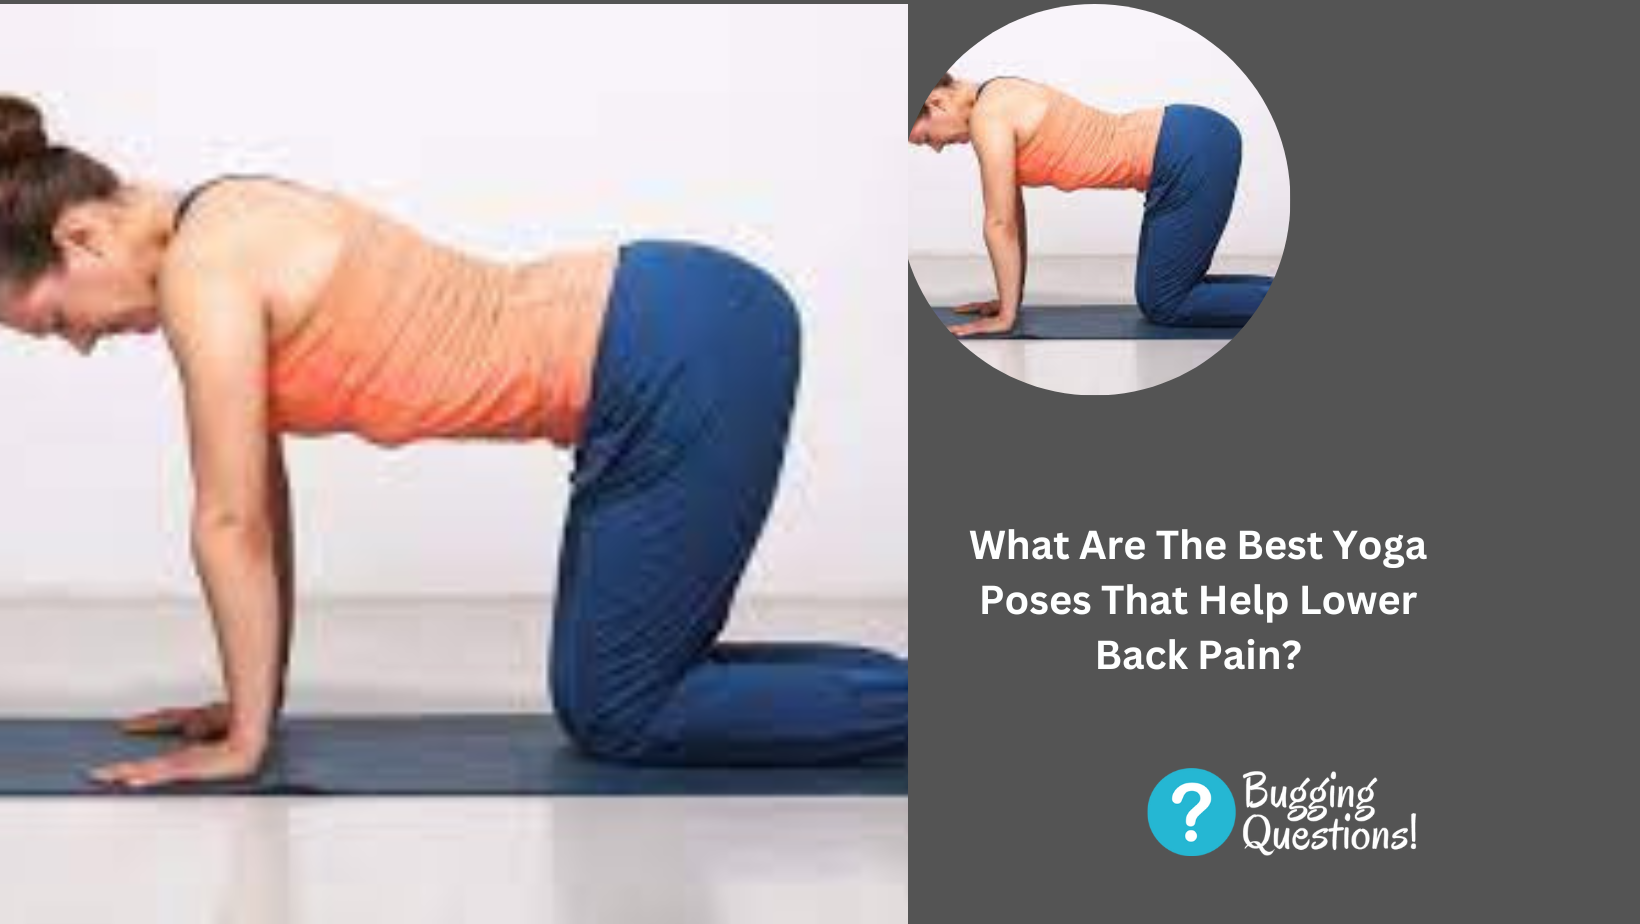 What Are The Best Yoga Poses That Help Lower Back Pain?